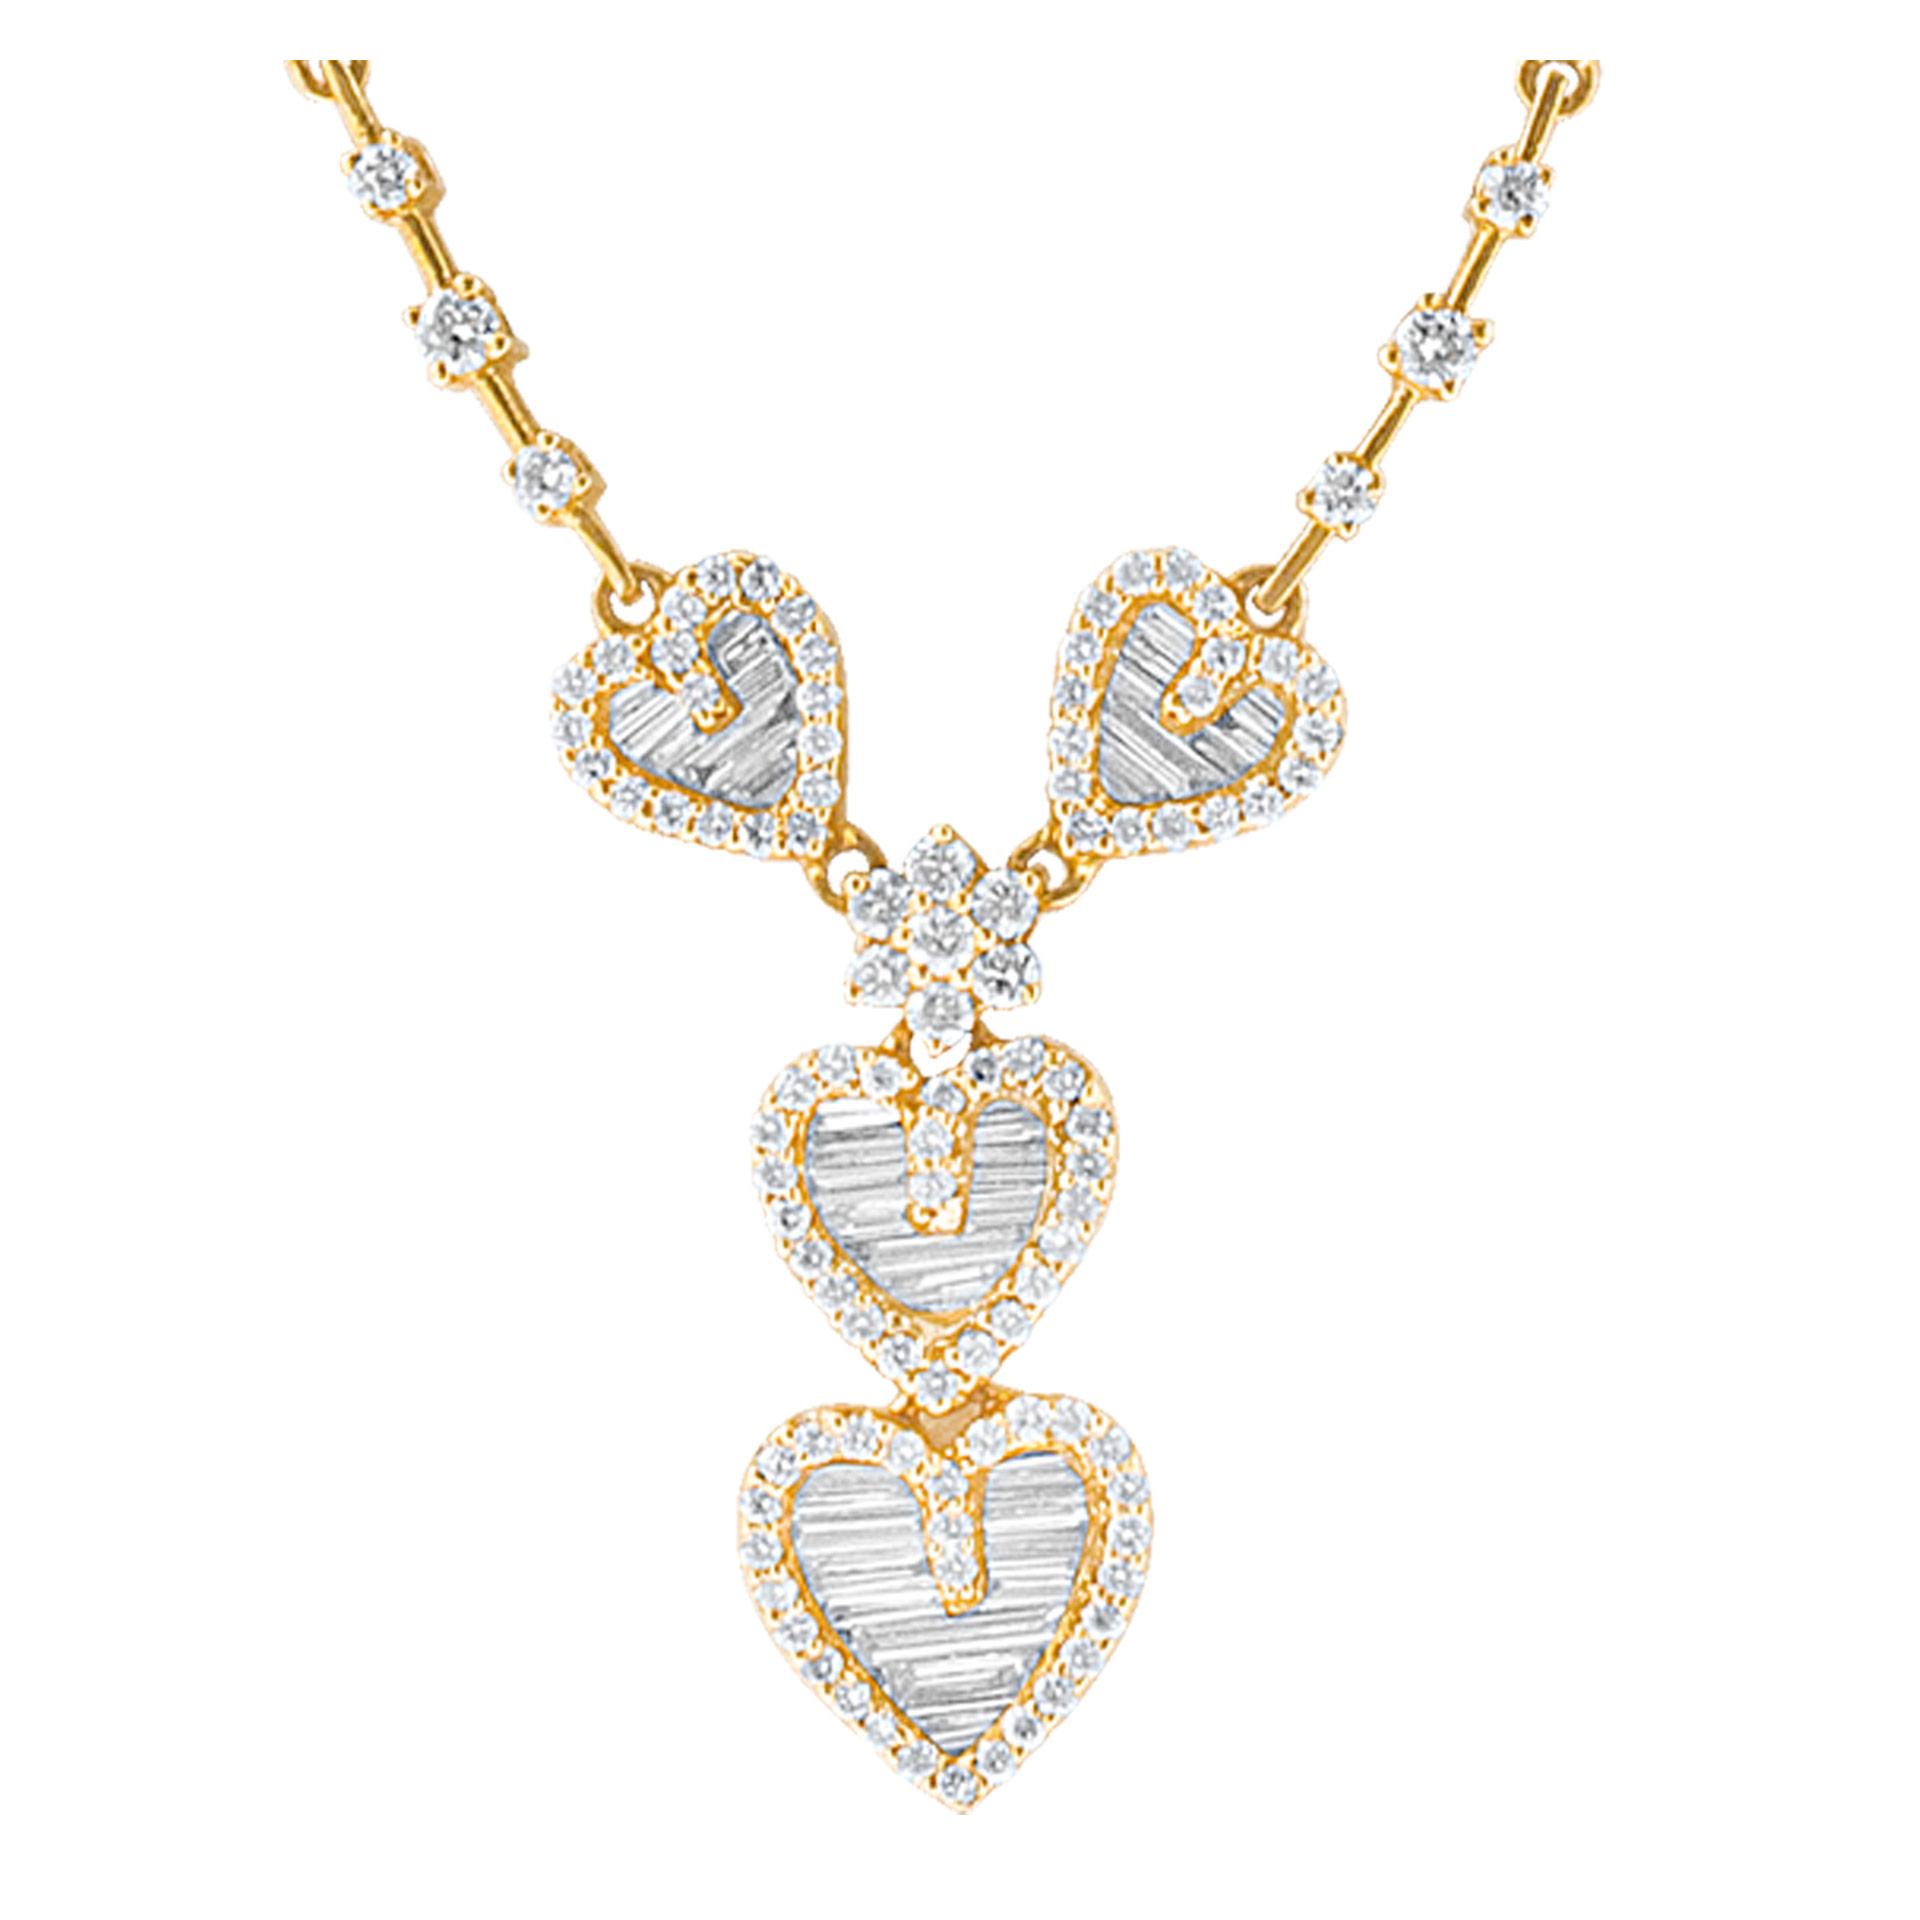 Heart diamond neacklace in 18k yellow gold